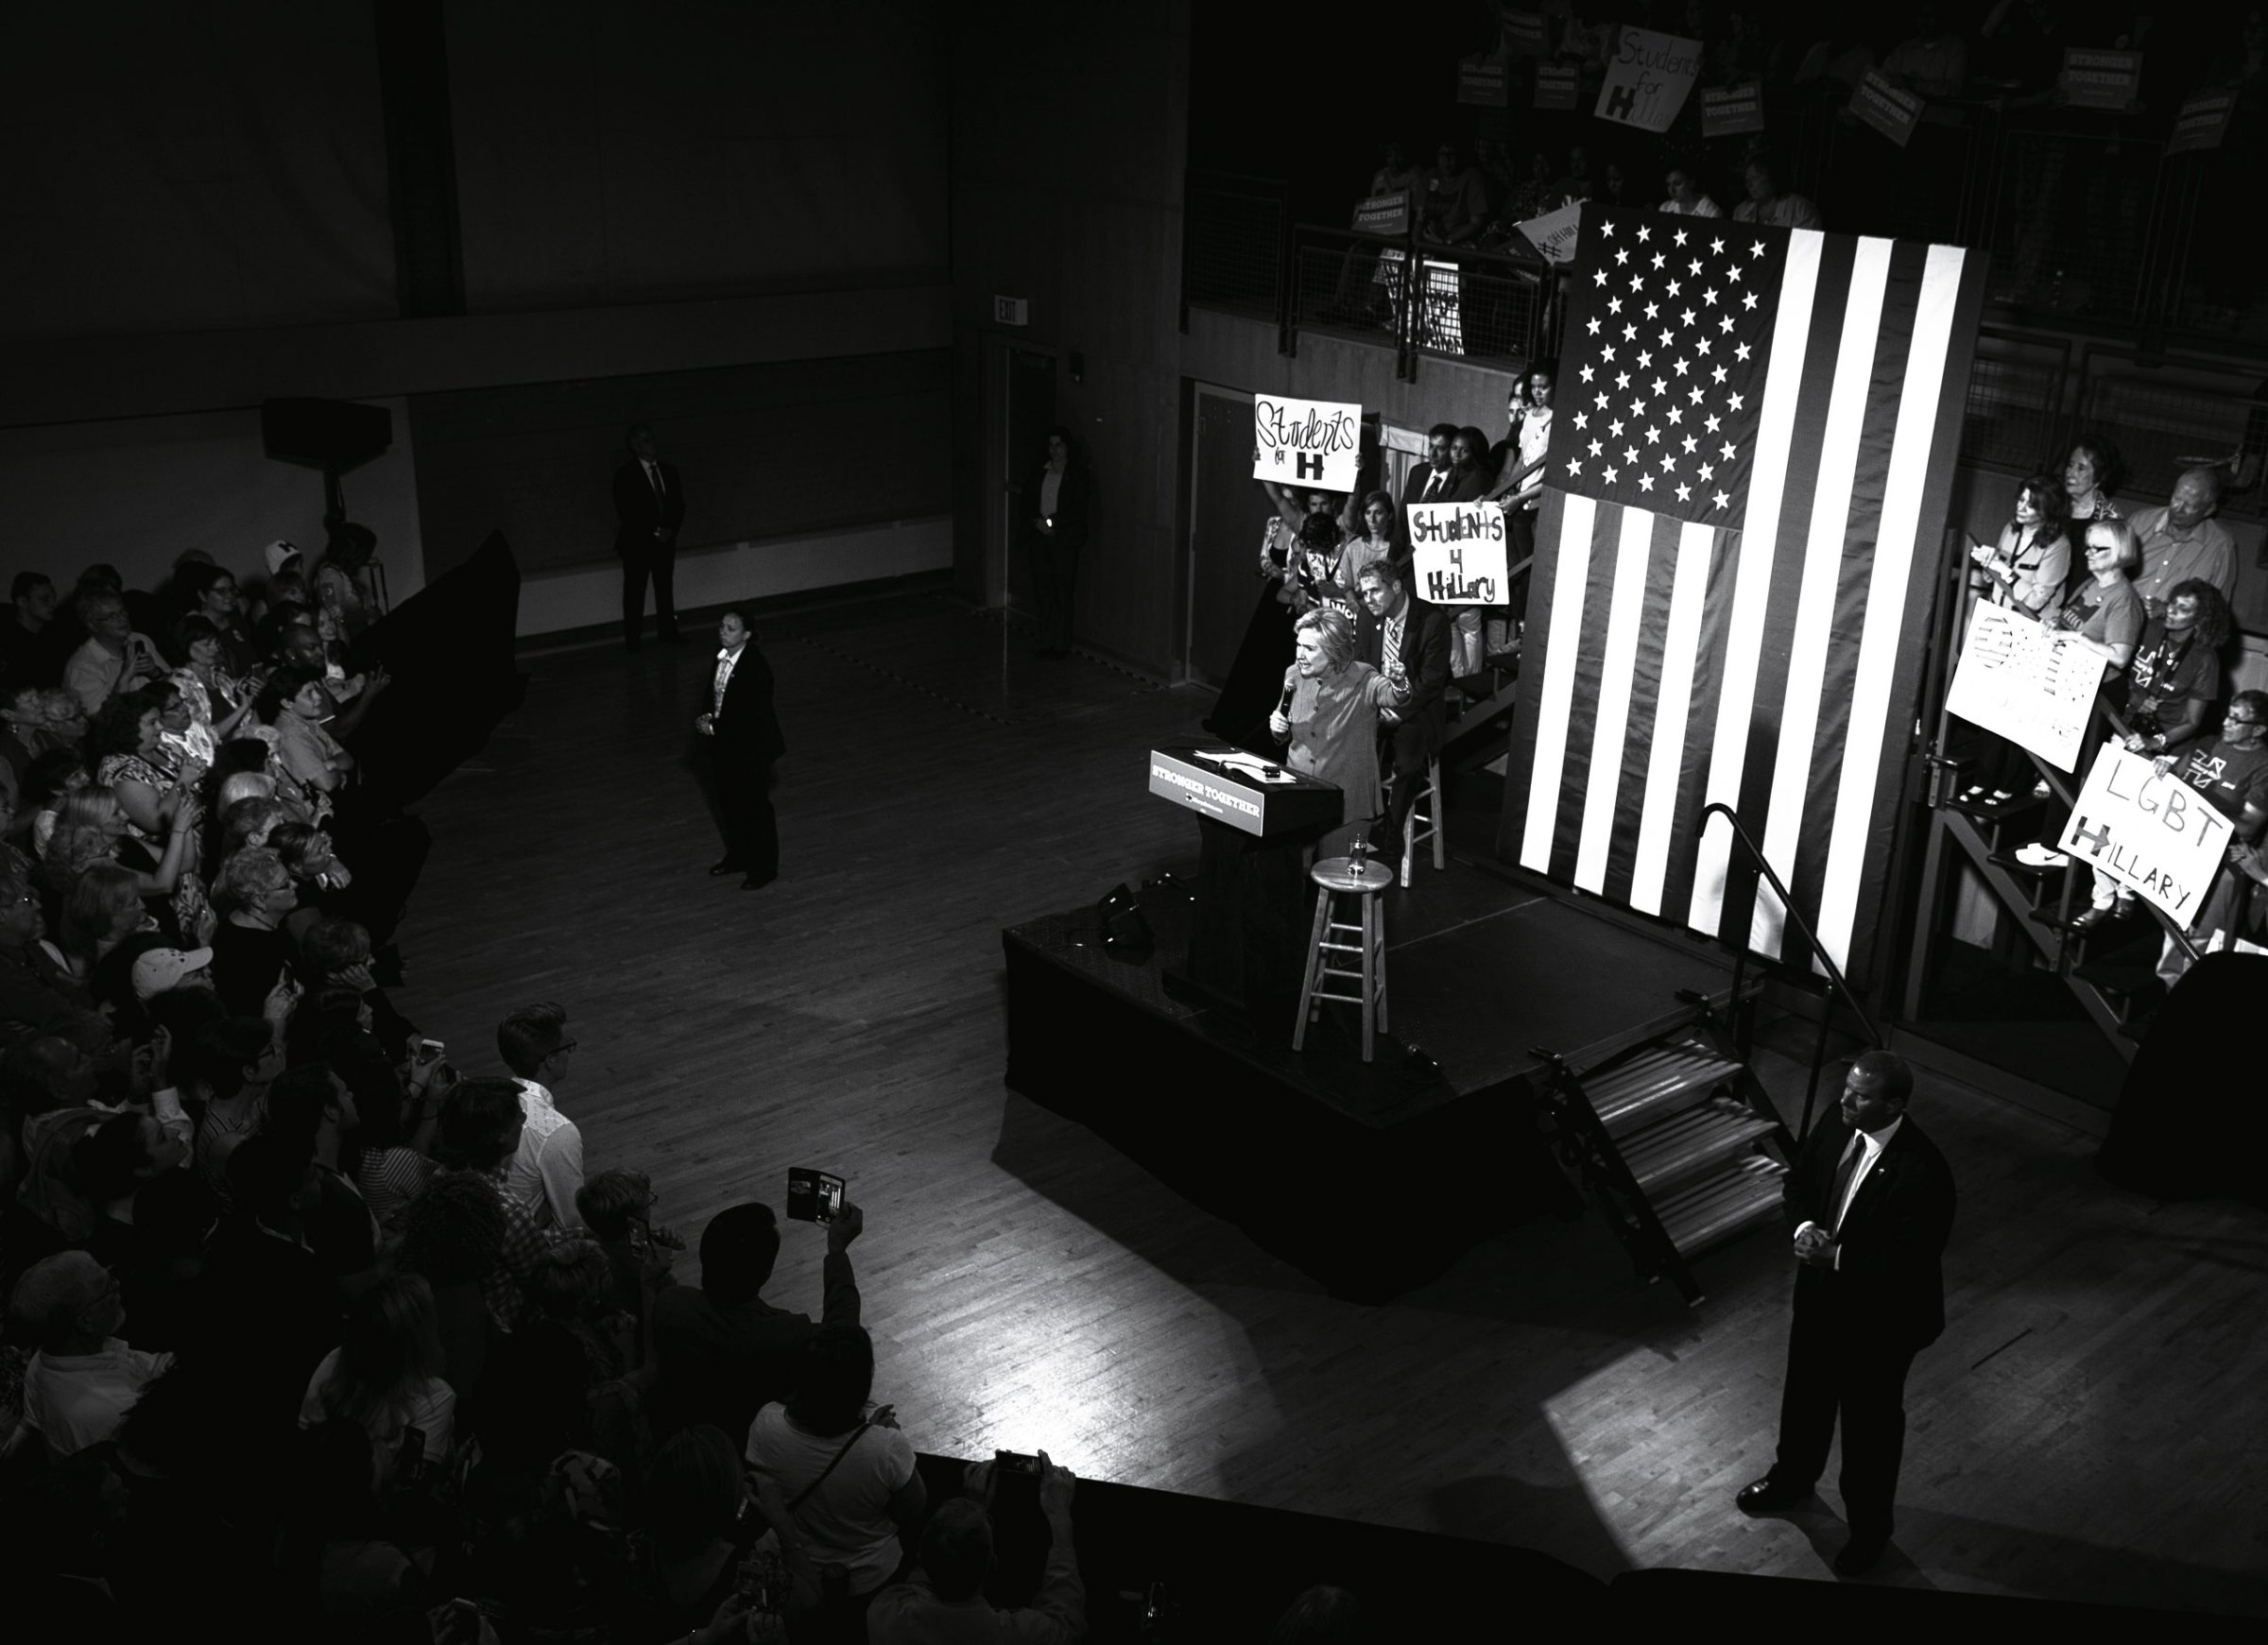 Clinton rallying the faithful at an event with volunteers in Cincinnati on July 18